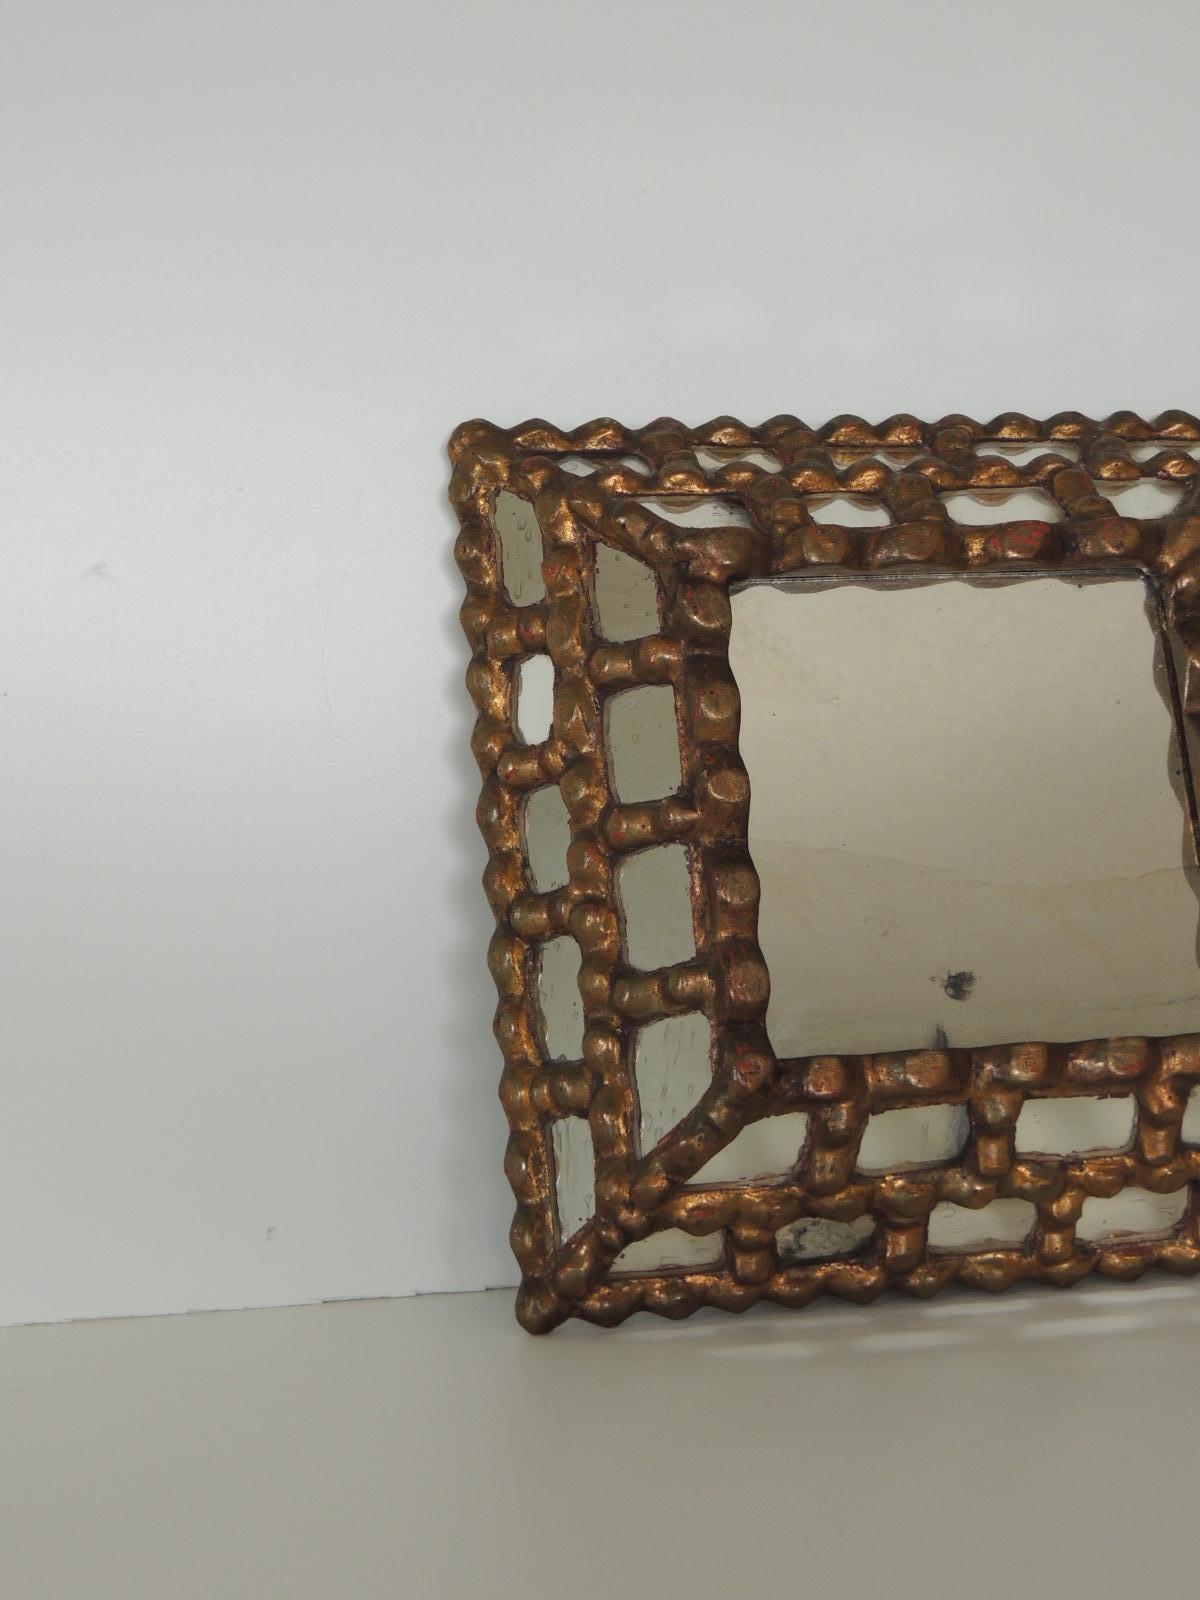 Vintage Peruvian square gold mirror
Mirror tile style frame over wood.
Size: 11